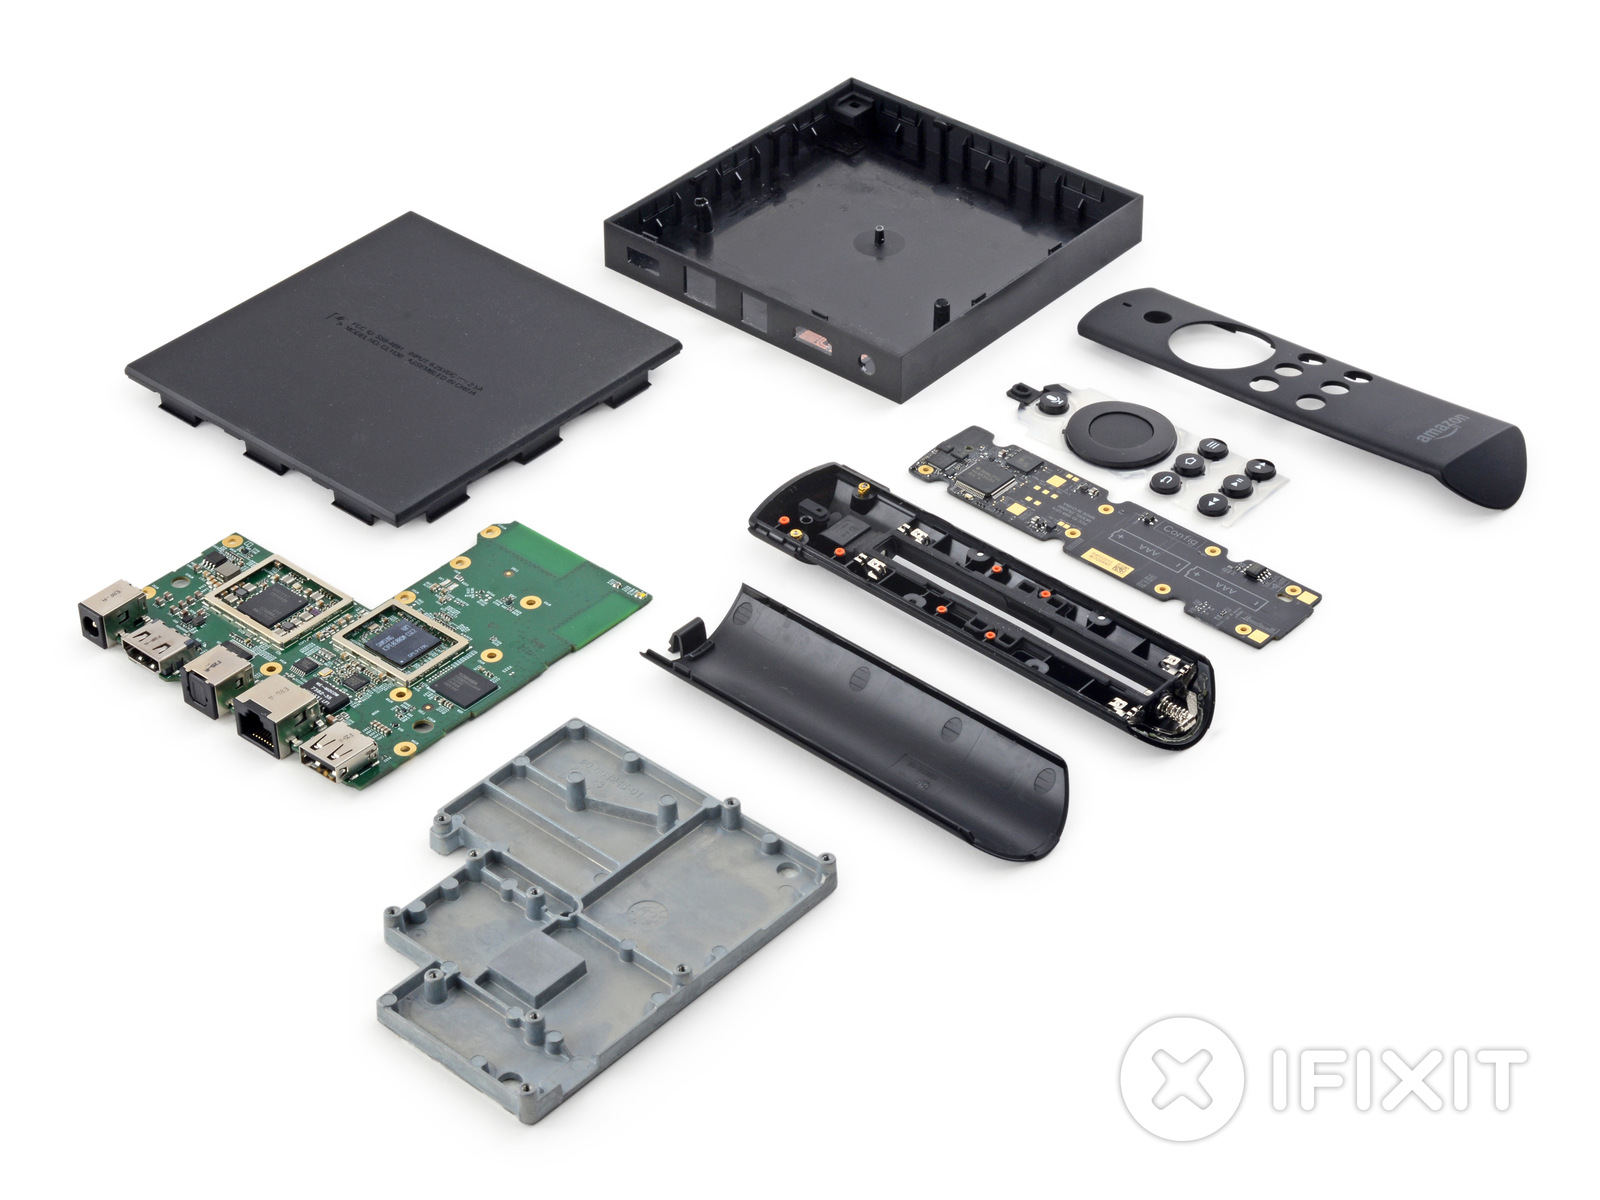 What’s Inside The Amazon Fire TV